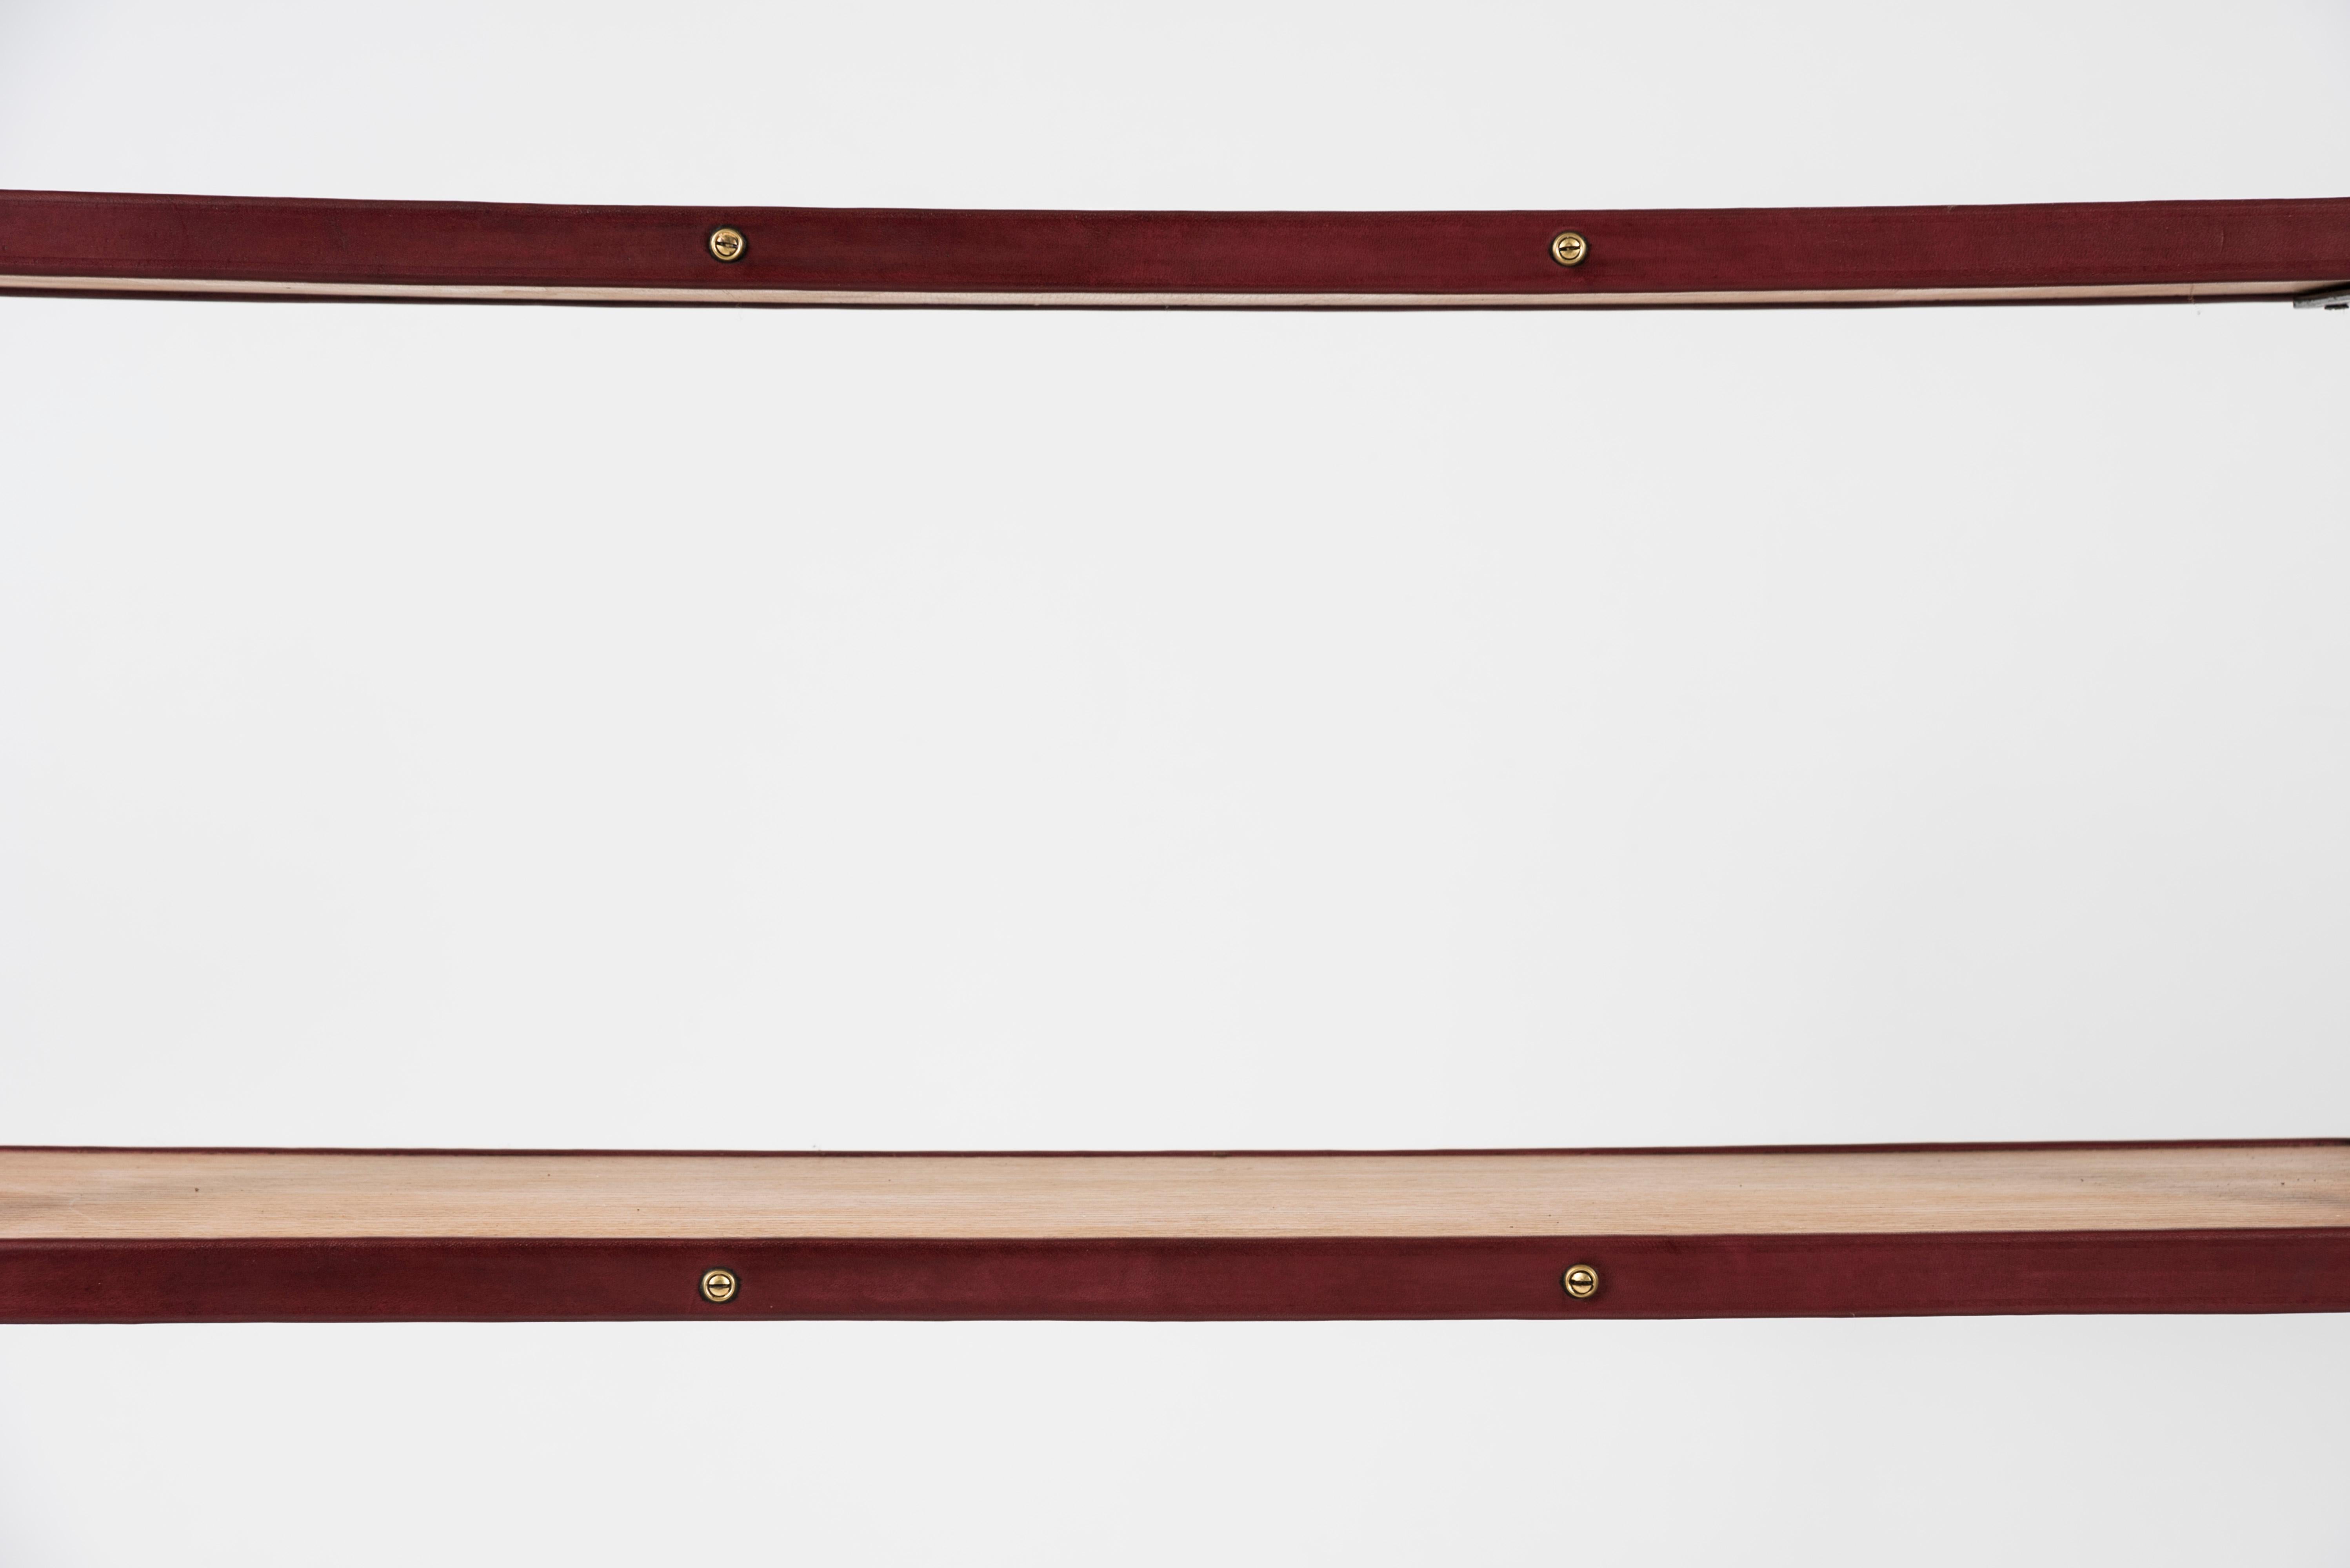 Stitched leather bookrack by Jacques Adnet
Oak and leather.